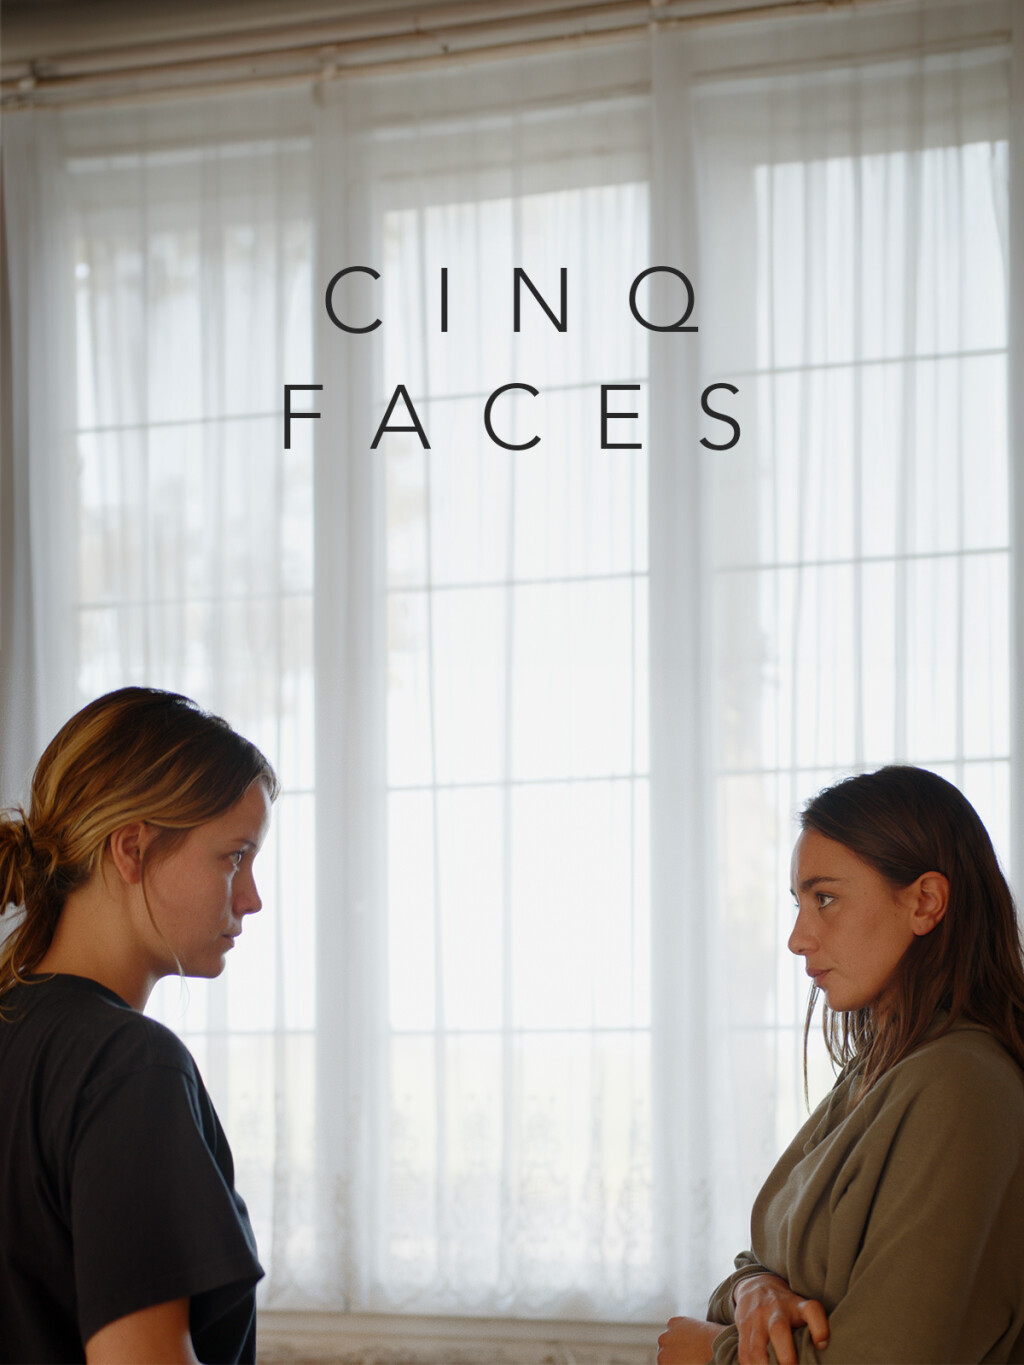 Filmposter for Cinq faces